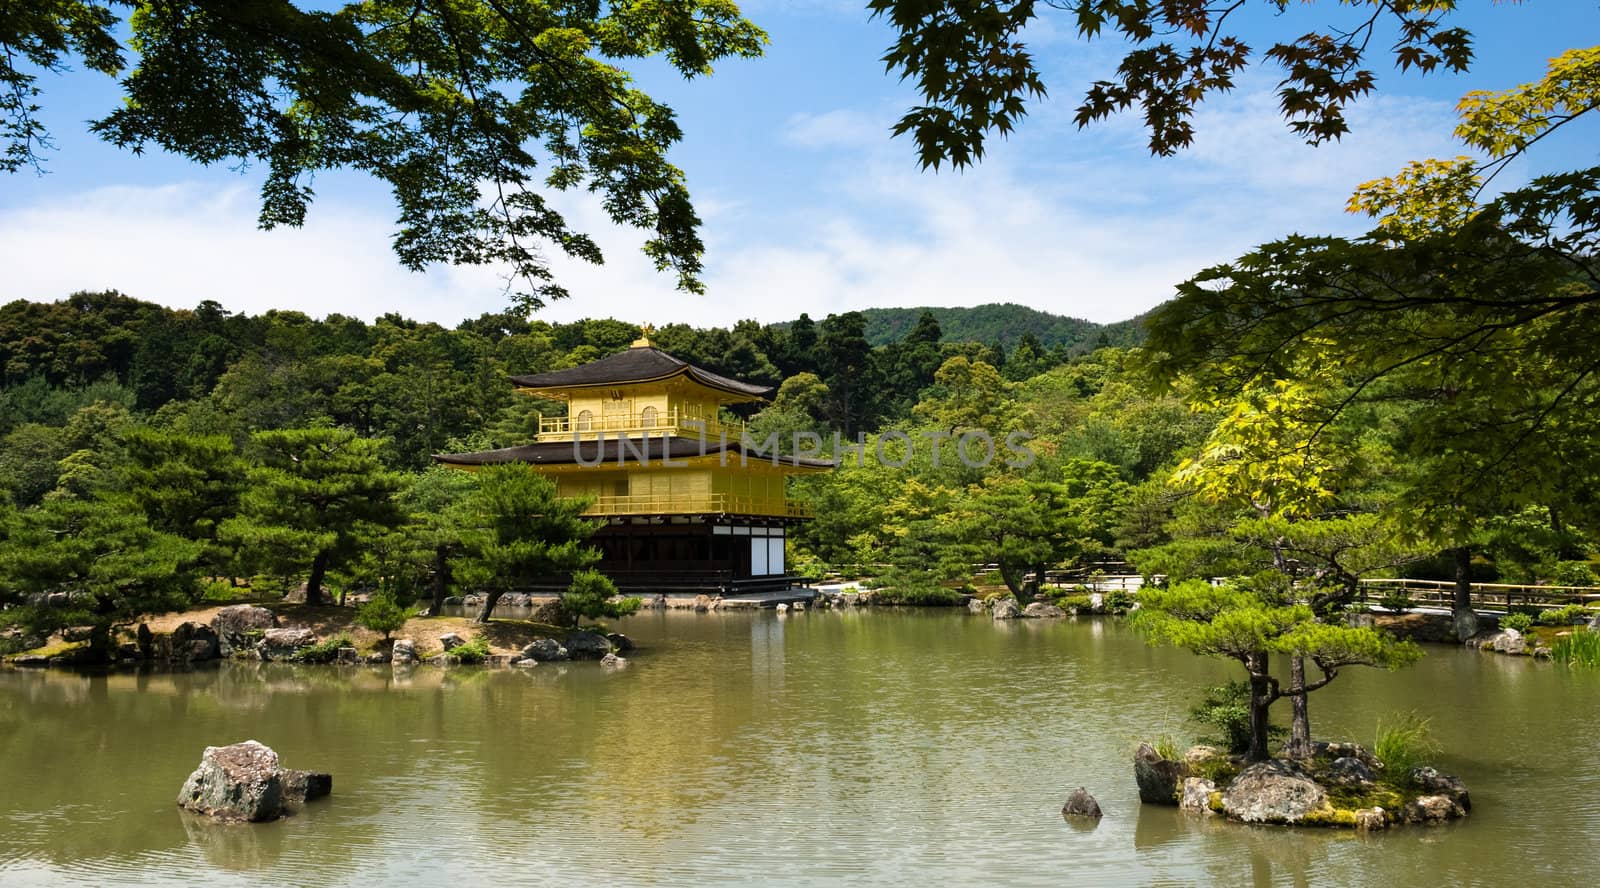 Kinkaku-ji, or formally Rokuon-ji, is a Zen Buddhist temple in Kyoto, Japan. The top two stories of the pavilion are covered with pure gold leaf.